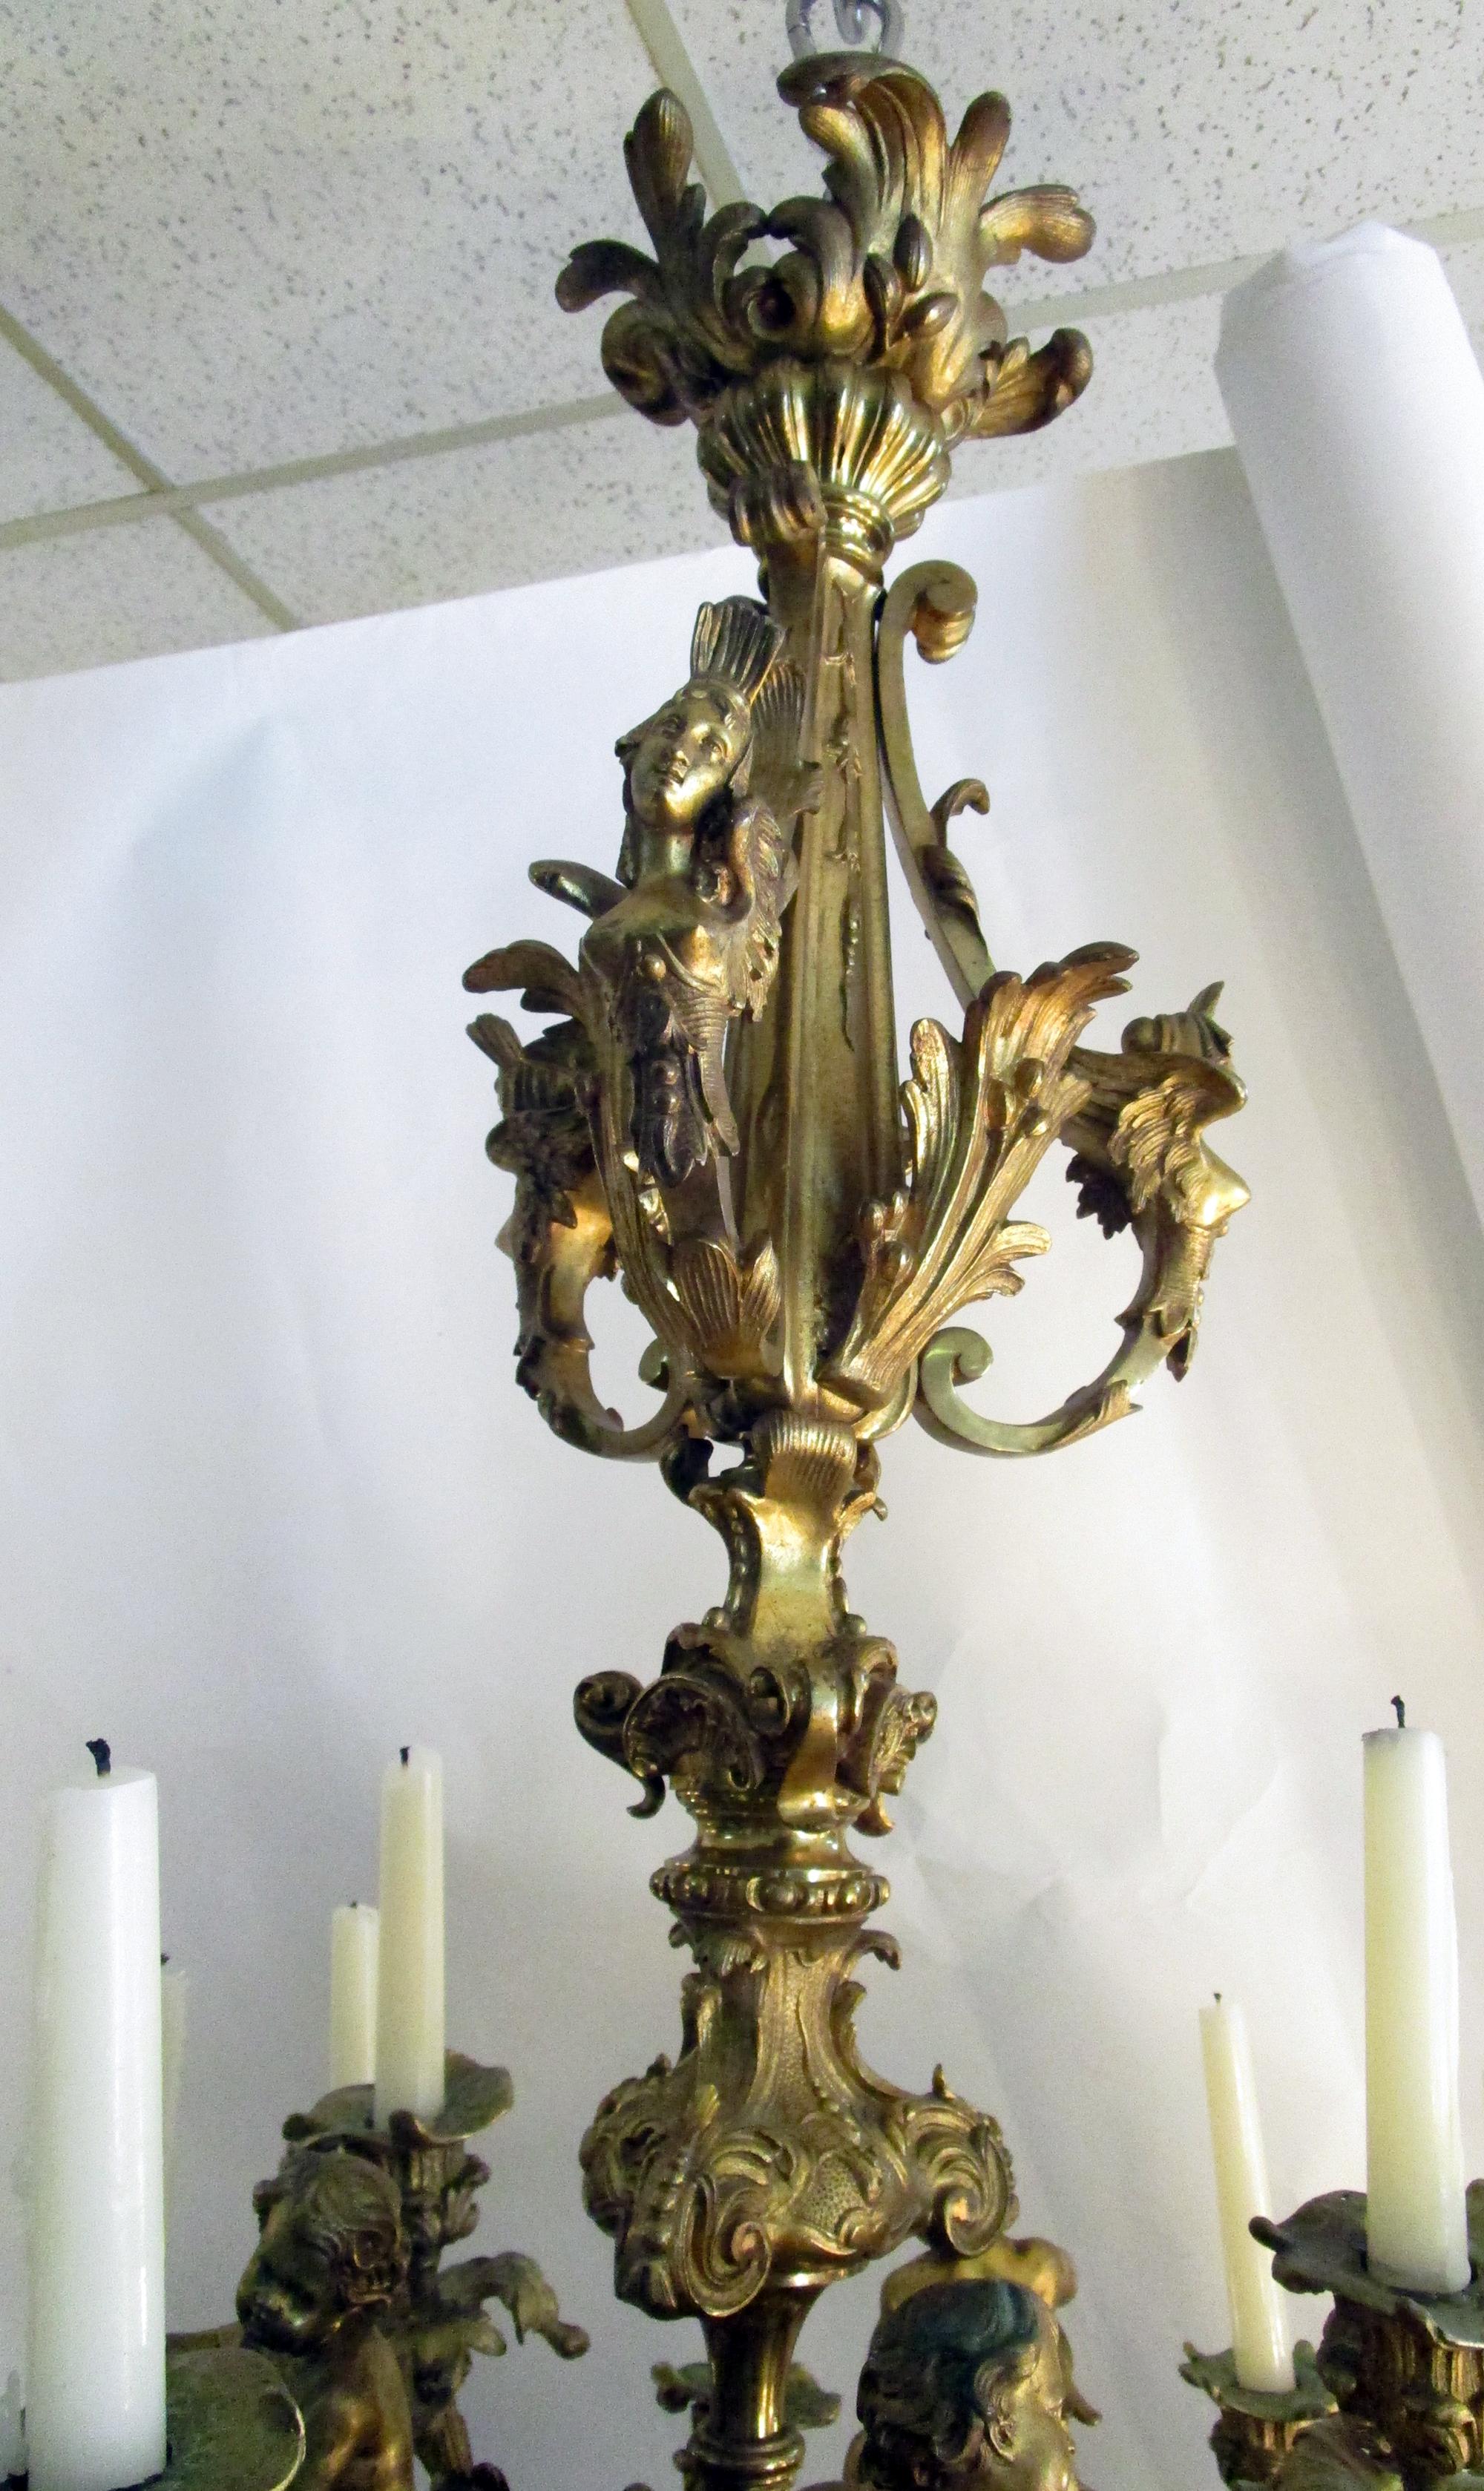 19th century French gilt bronze Napoleon III chandelier signed Raulin. Exquisitely modeled in a variety of figure head busts and leaf forms, it features three putti supporting the branches holding a total of fourteen candles. The Raulin firm was